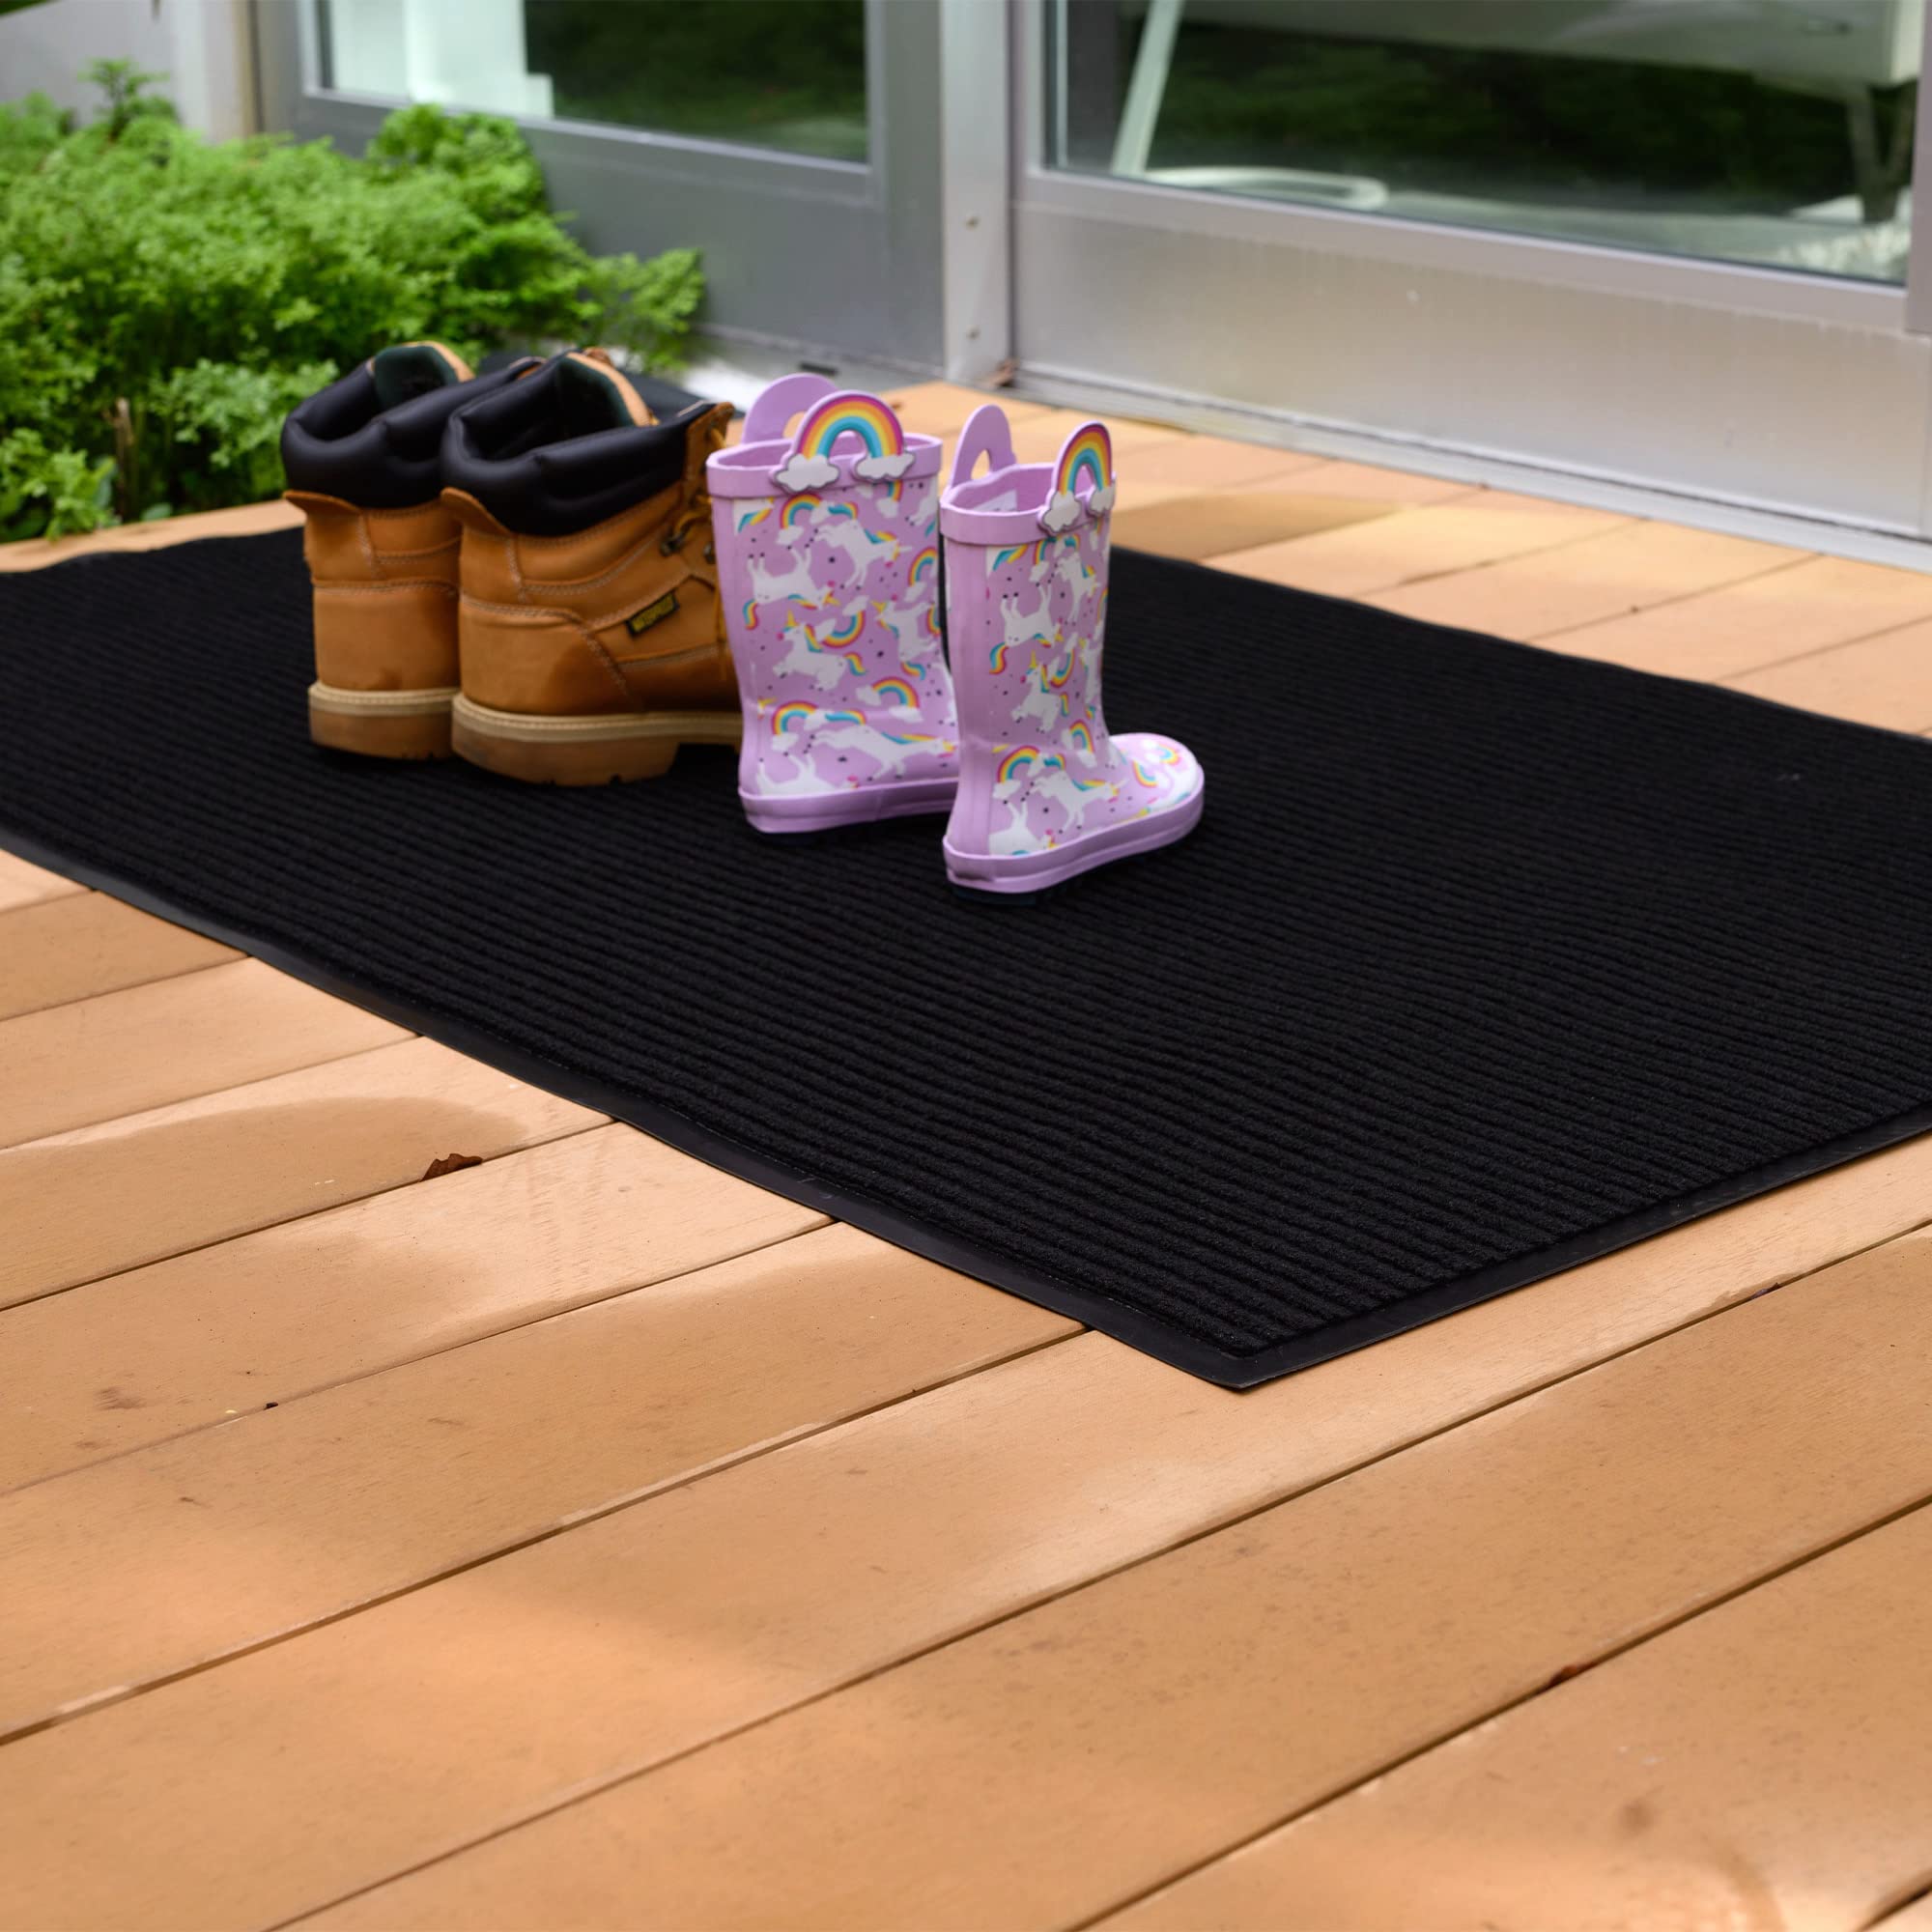 UNIMAT 4x6 (48"x 72") Dual Ribbed Outdoor-Indoor Doormat with Waterproof Black Rubber Backing - Stylish Welcome Mat, Perfect for Home, Office, and Kitchen Entrances